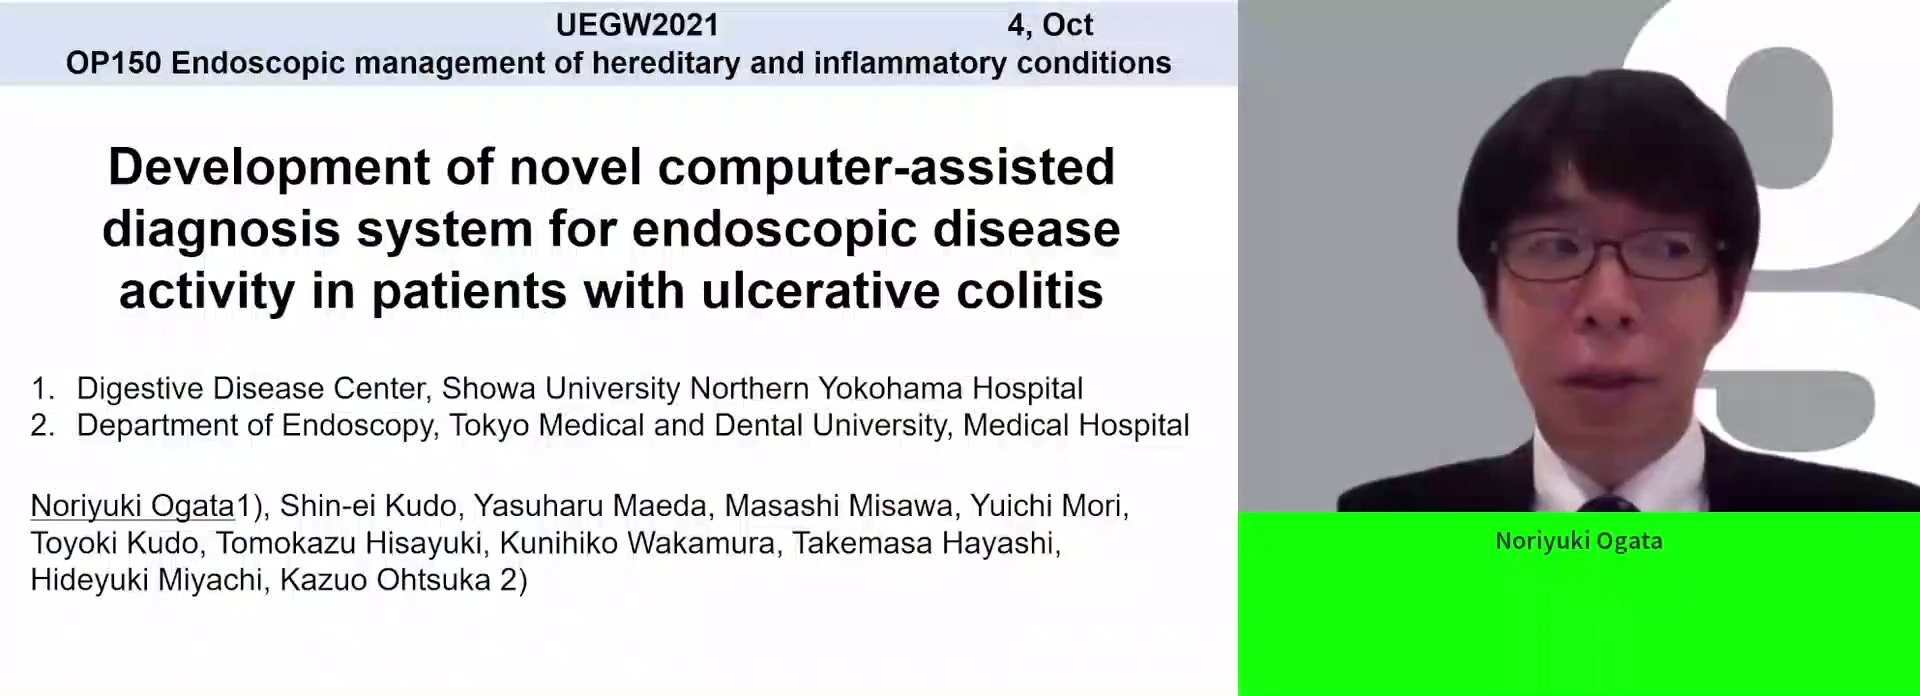 DEVELOPMENT OF NOVEL COMPUTER-ASSISTED DIAGNOSIS SYSTEM FOR ENDOSCOPIC DISEASE ACTIVITY IN PATIENTS WITH ULCERATIVE COLITIS